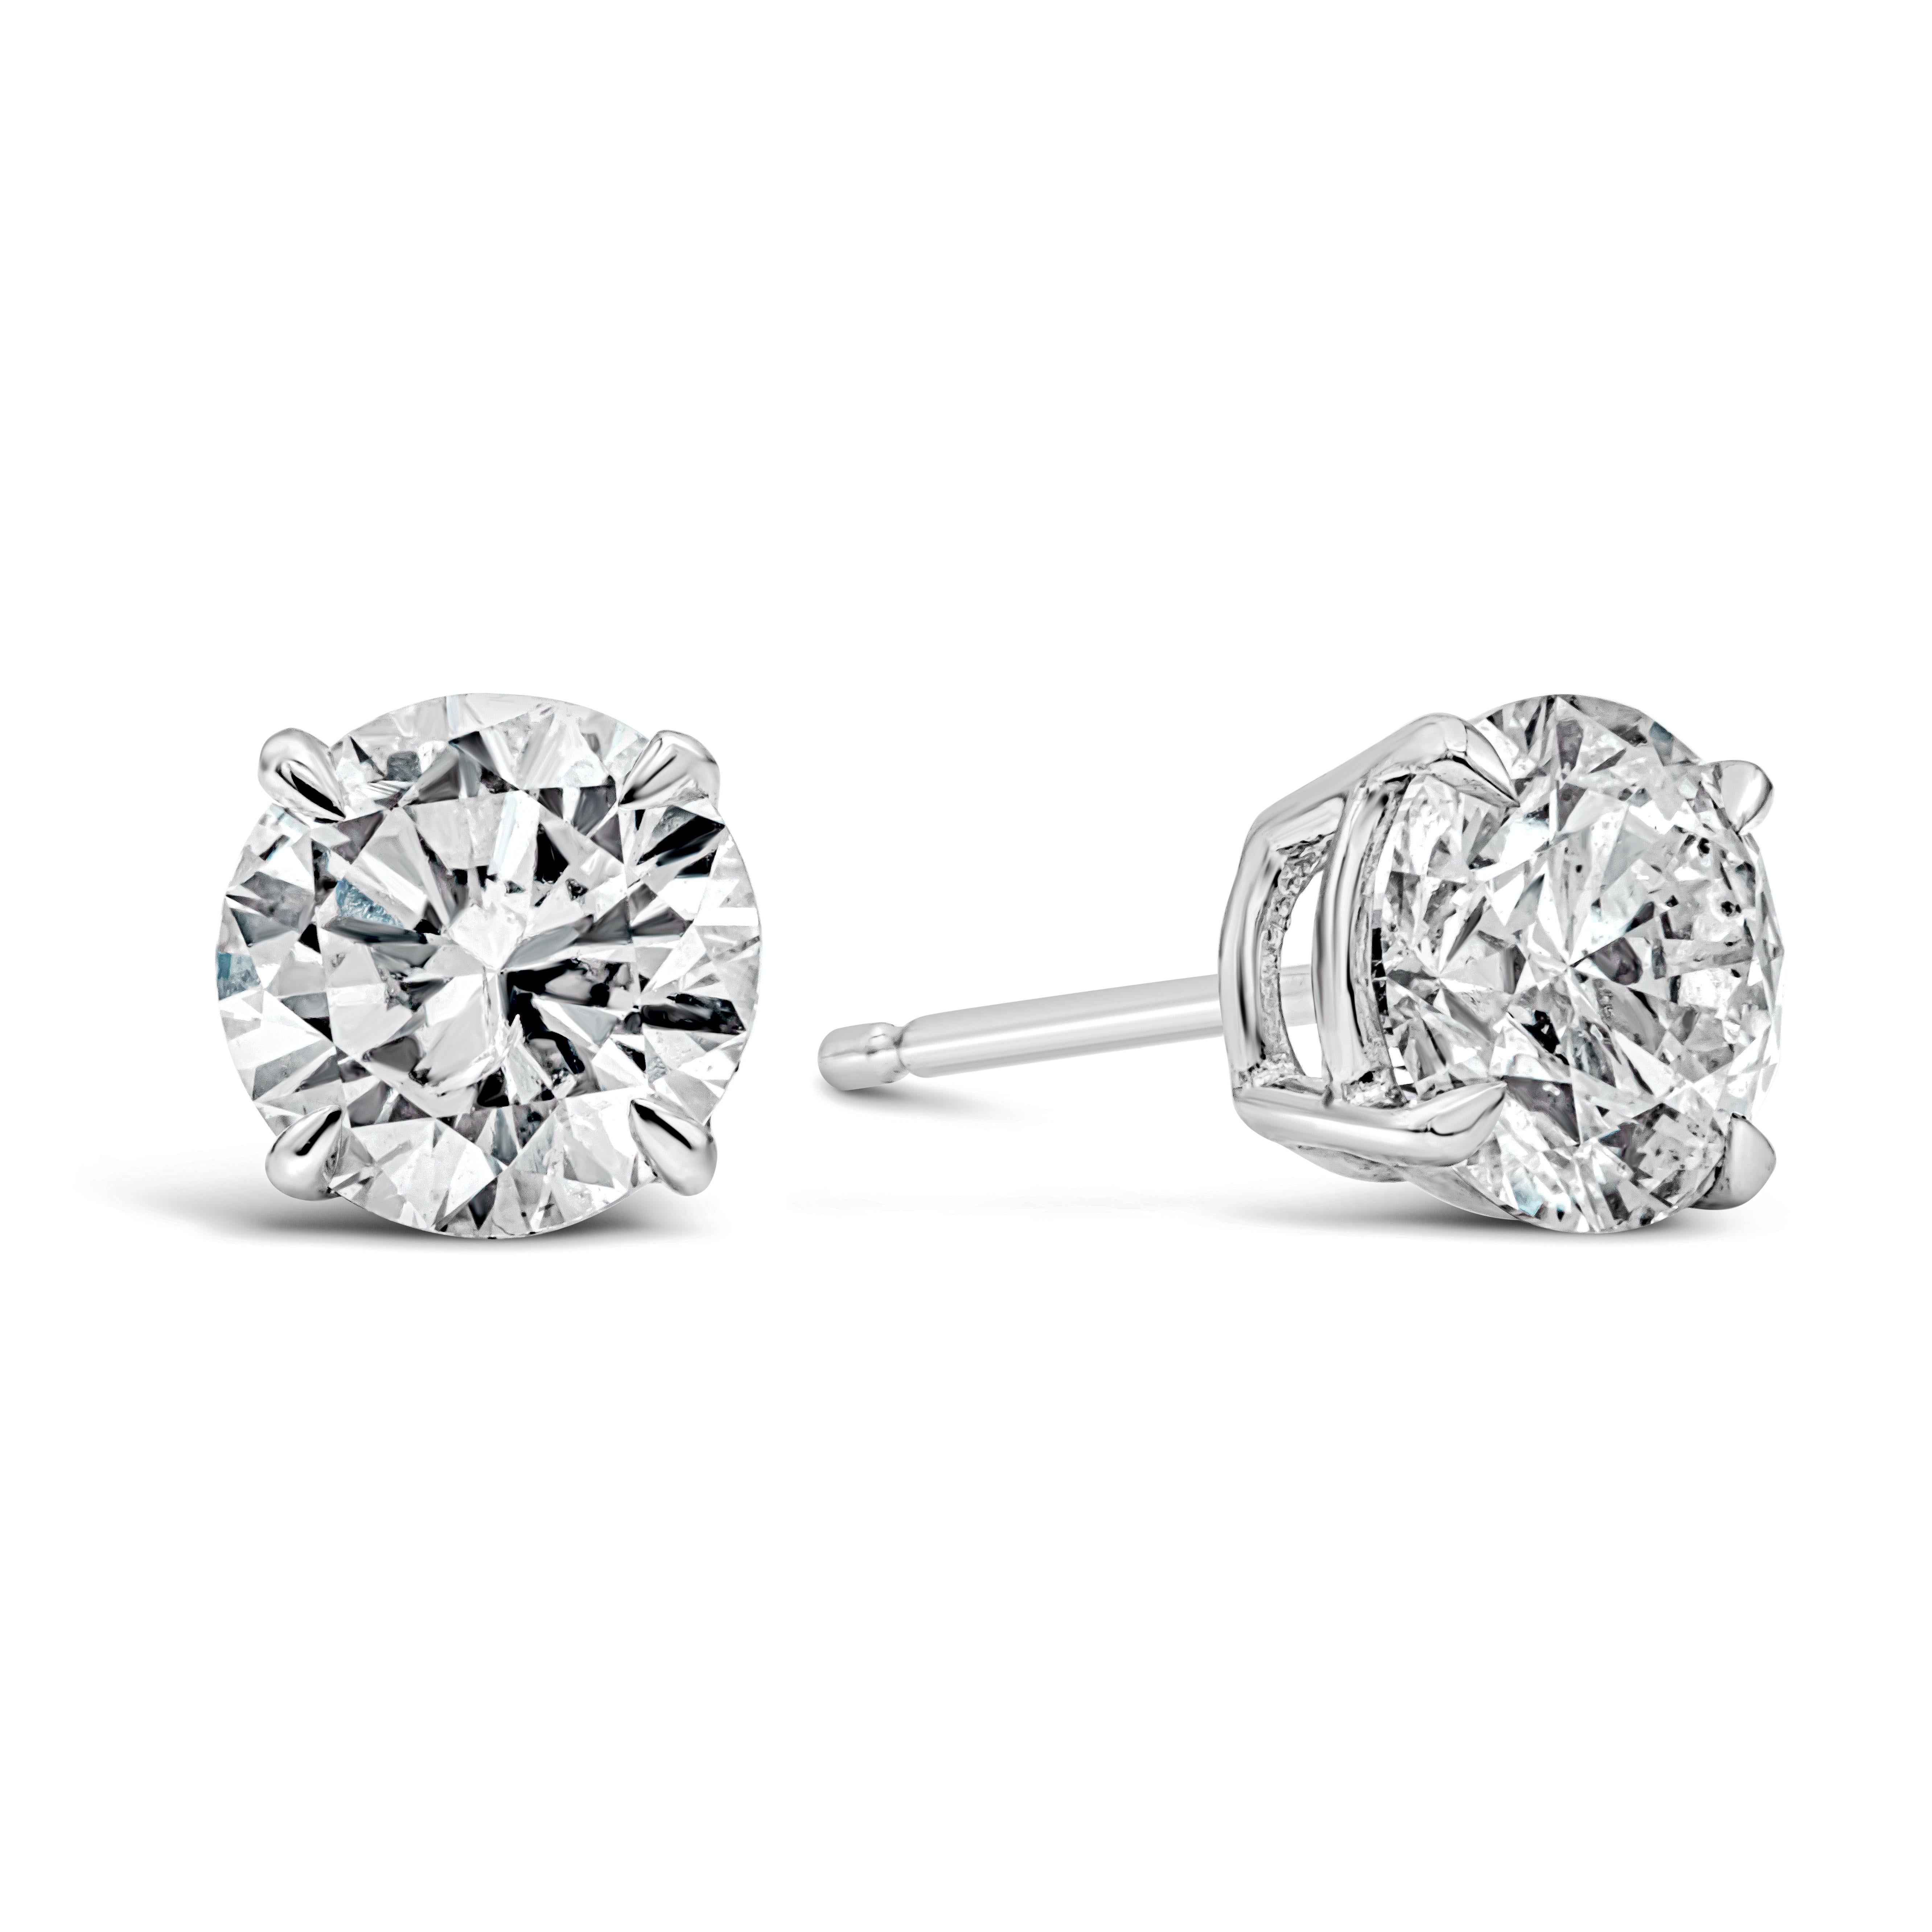 This simple yet classic style of stud earrings showcasing a pair of round brilliant diamonds weighing 2.08 carats total, set in an 14k and 18k white gold mounting. Diamonds are approximately F color, SI3 in clarity.

Style available in different